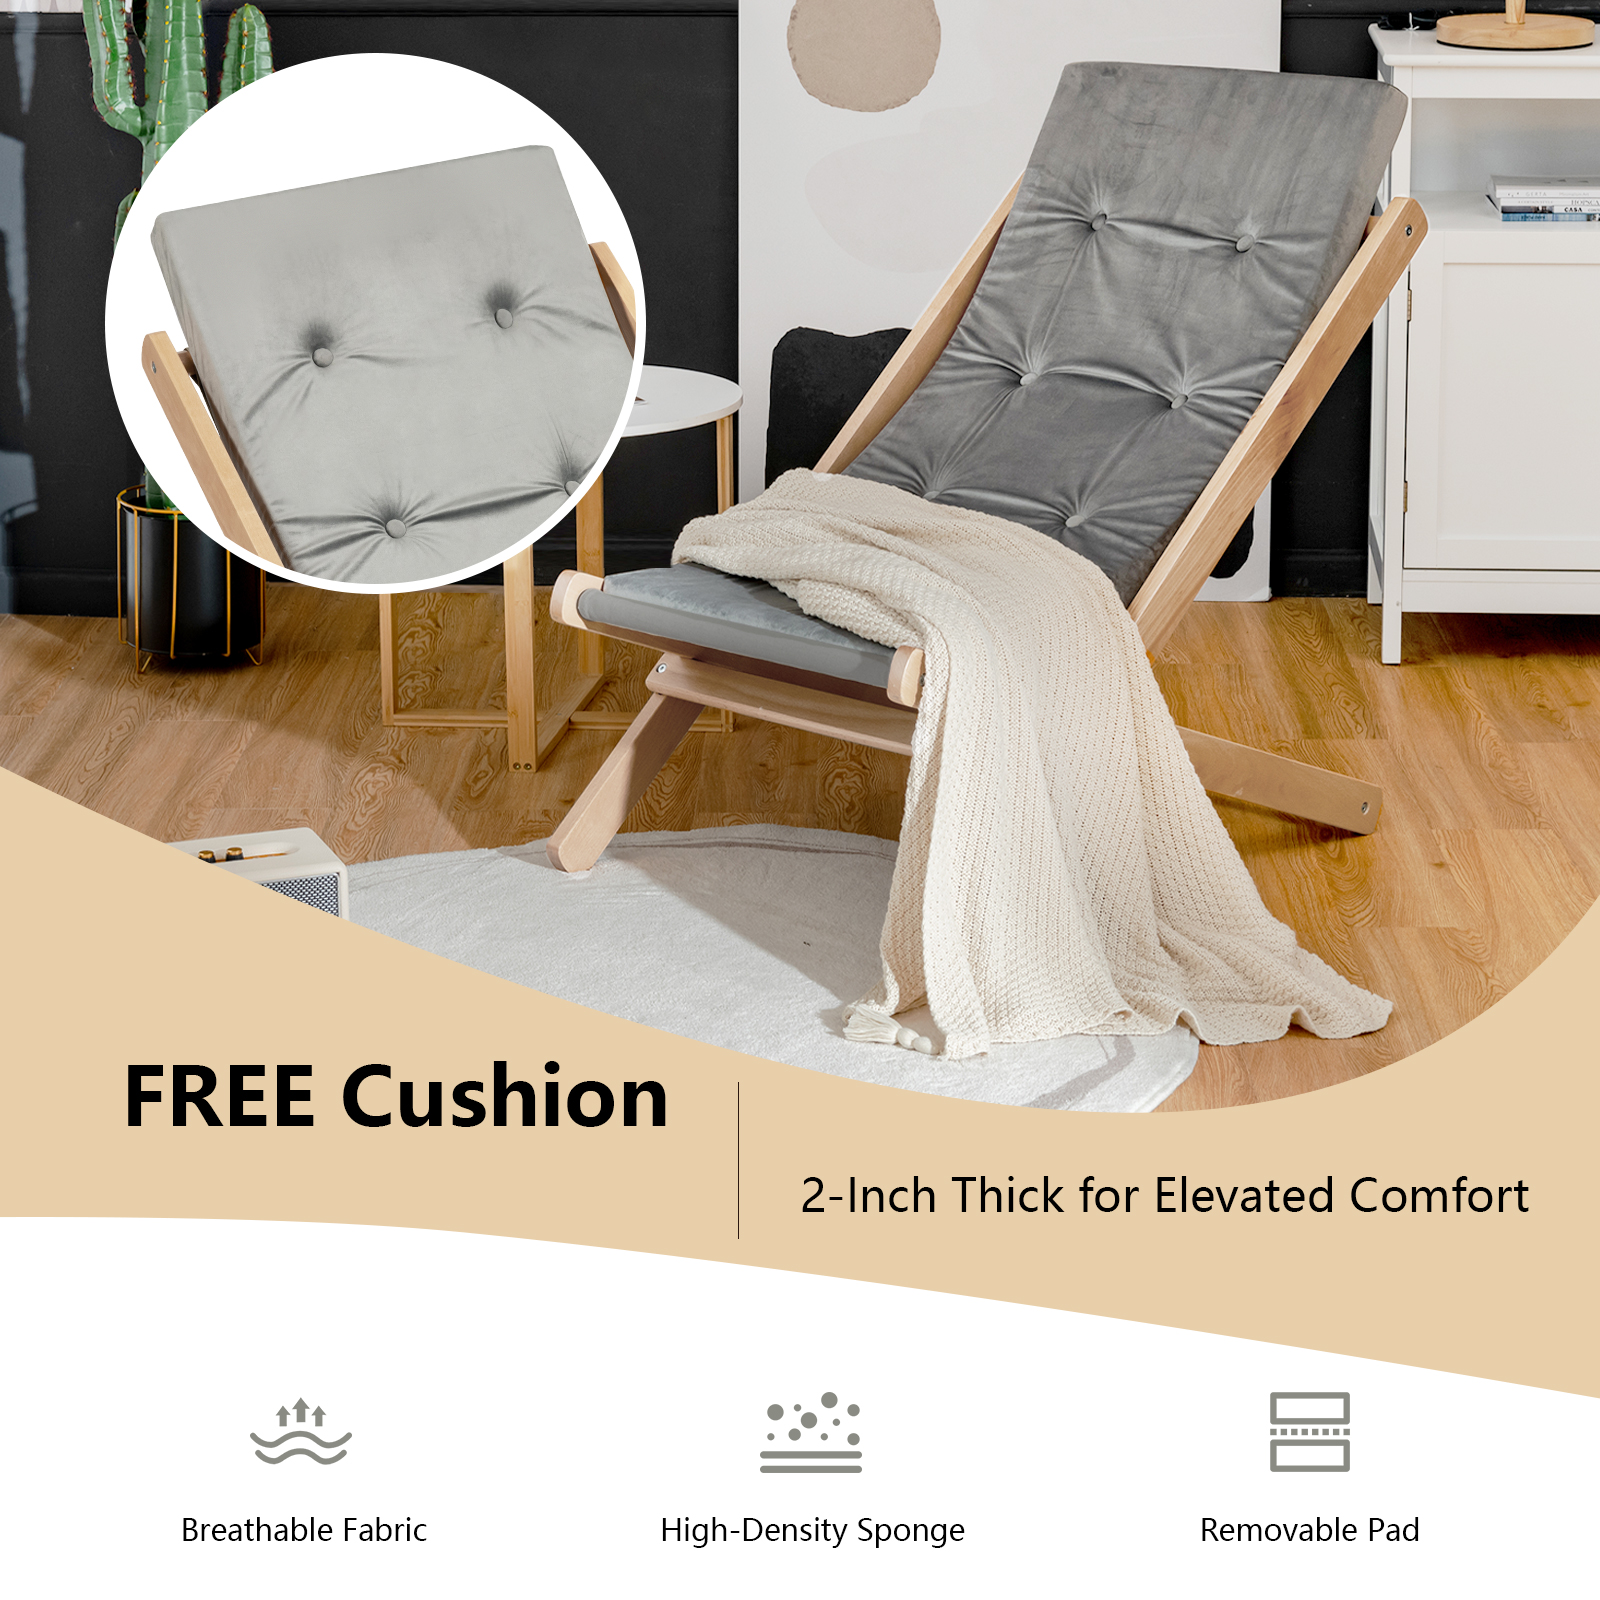 Topbuy Foldable Wood Beach Sling Chair with 3 Adjustable Positions Indoor Living Room Chaise Lounge Grey - image 2 of 8